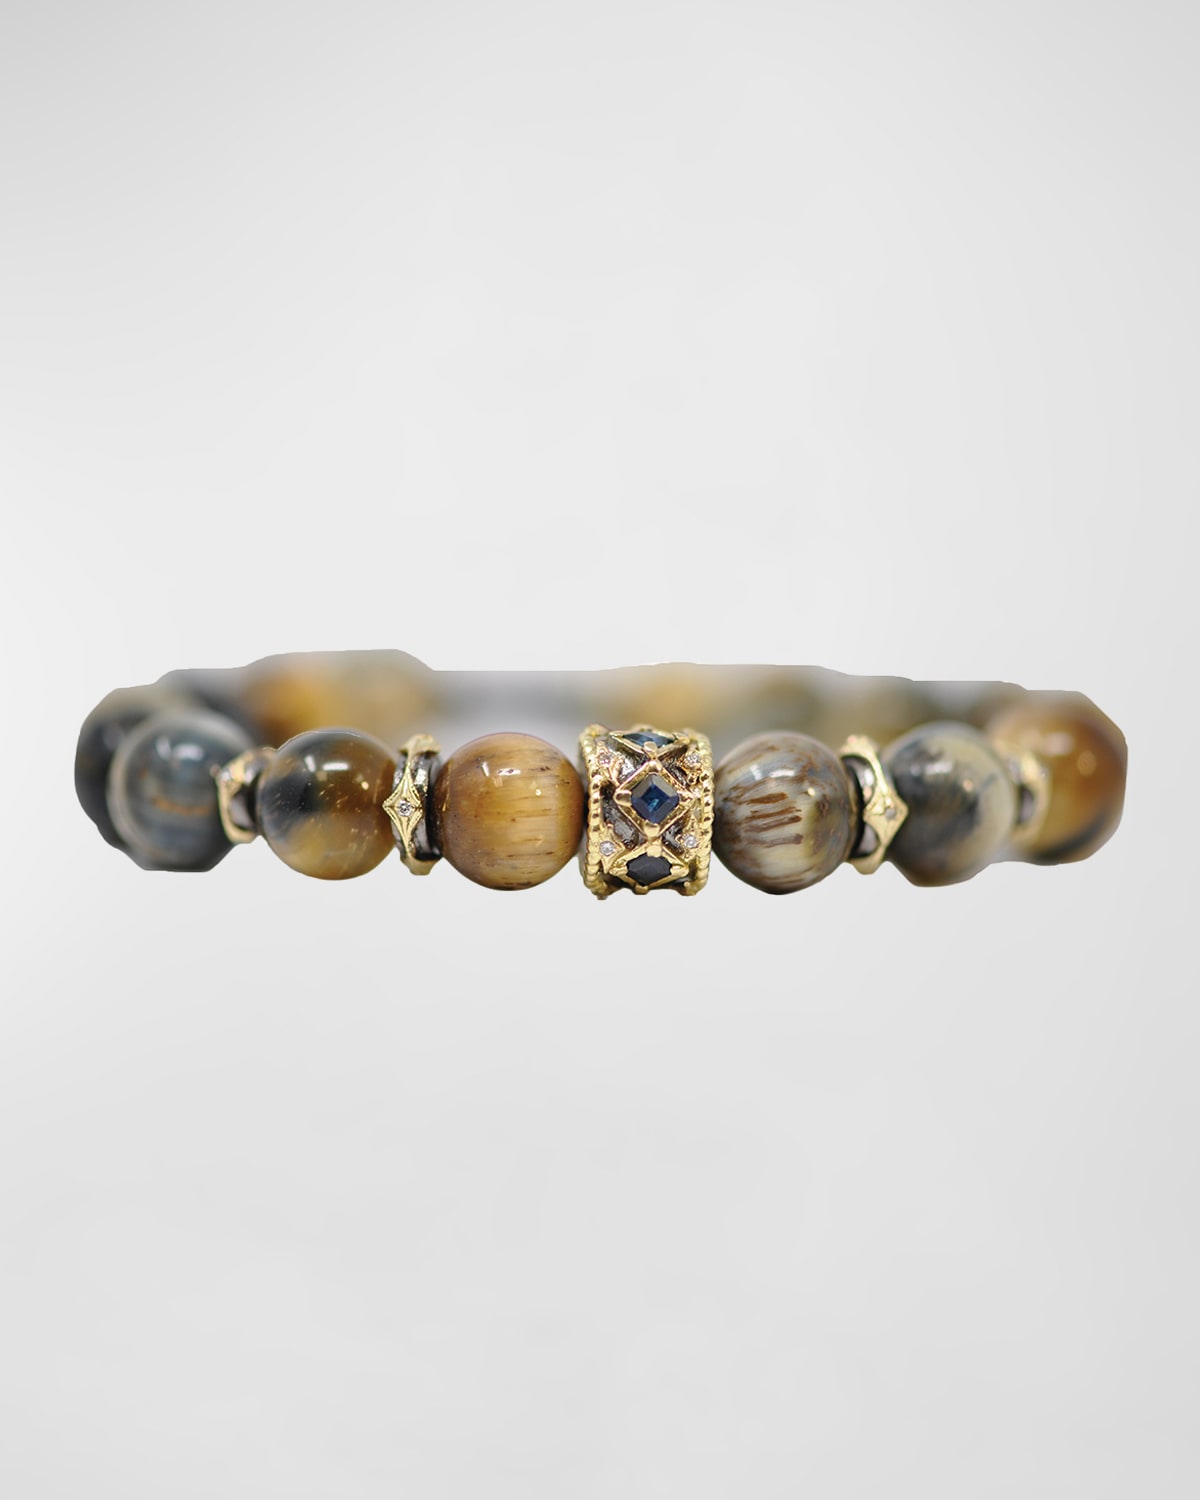 Men's Old World Tiger's Eye Beaded Bracelet with Diamonds and Sapphires